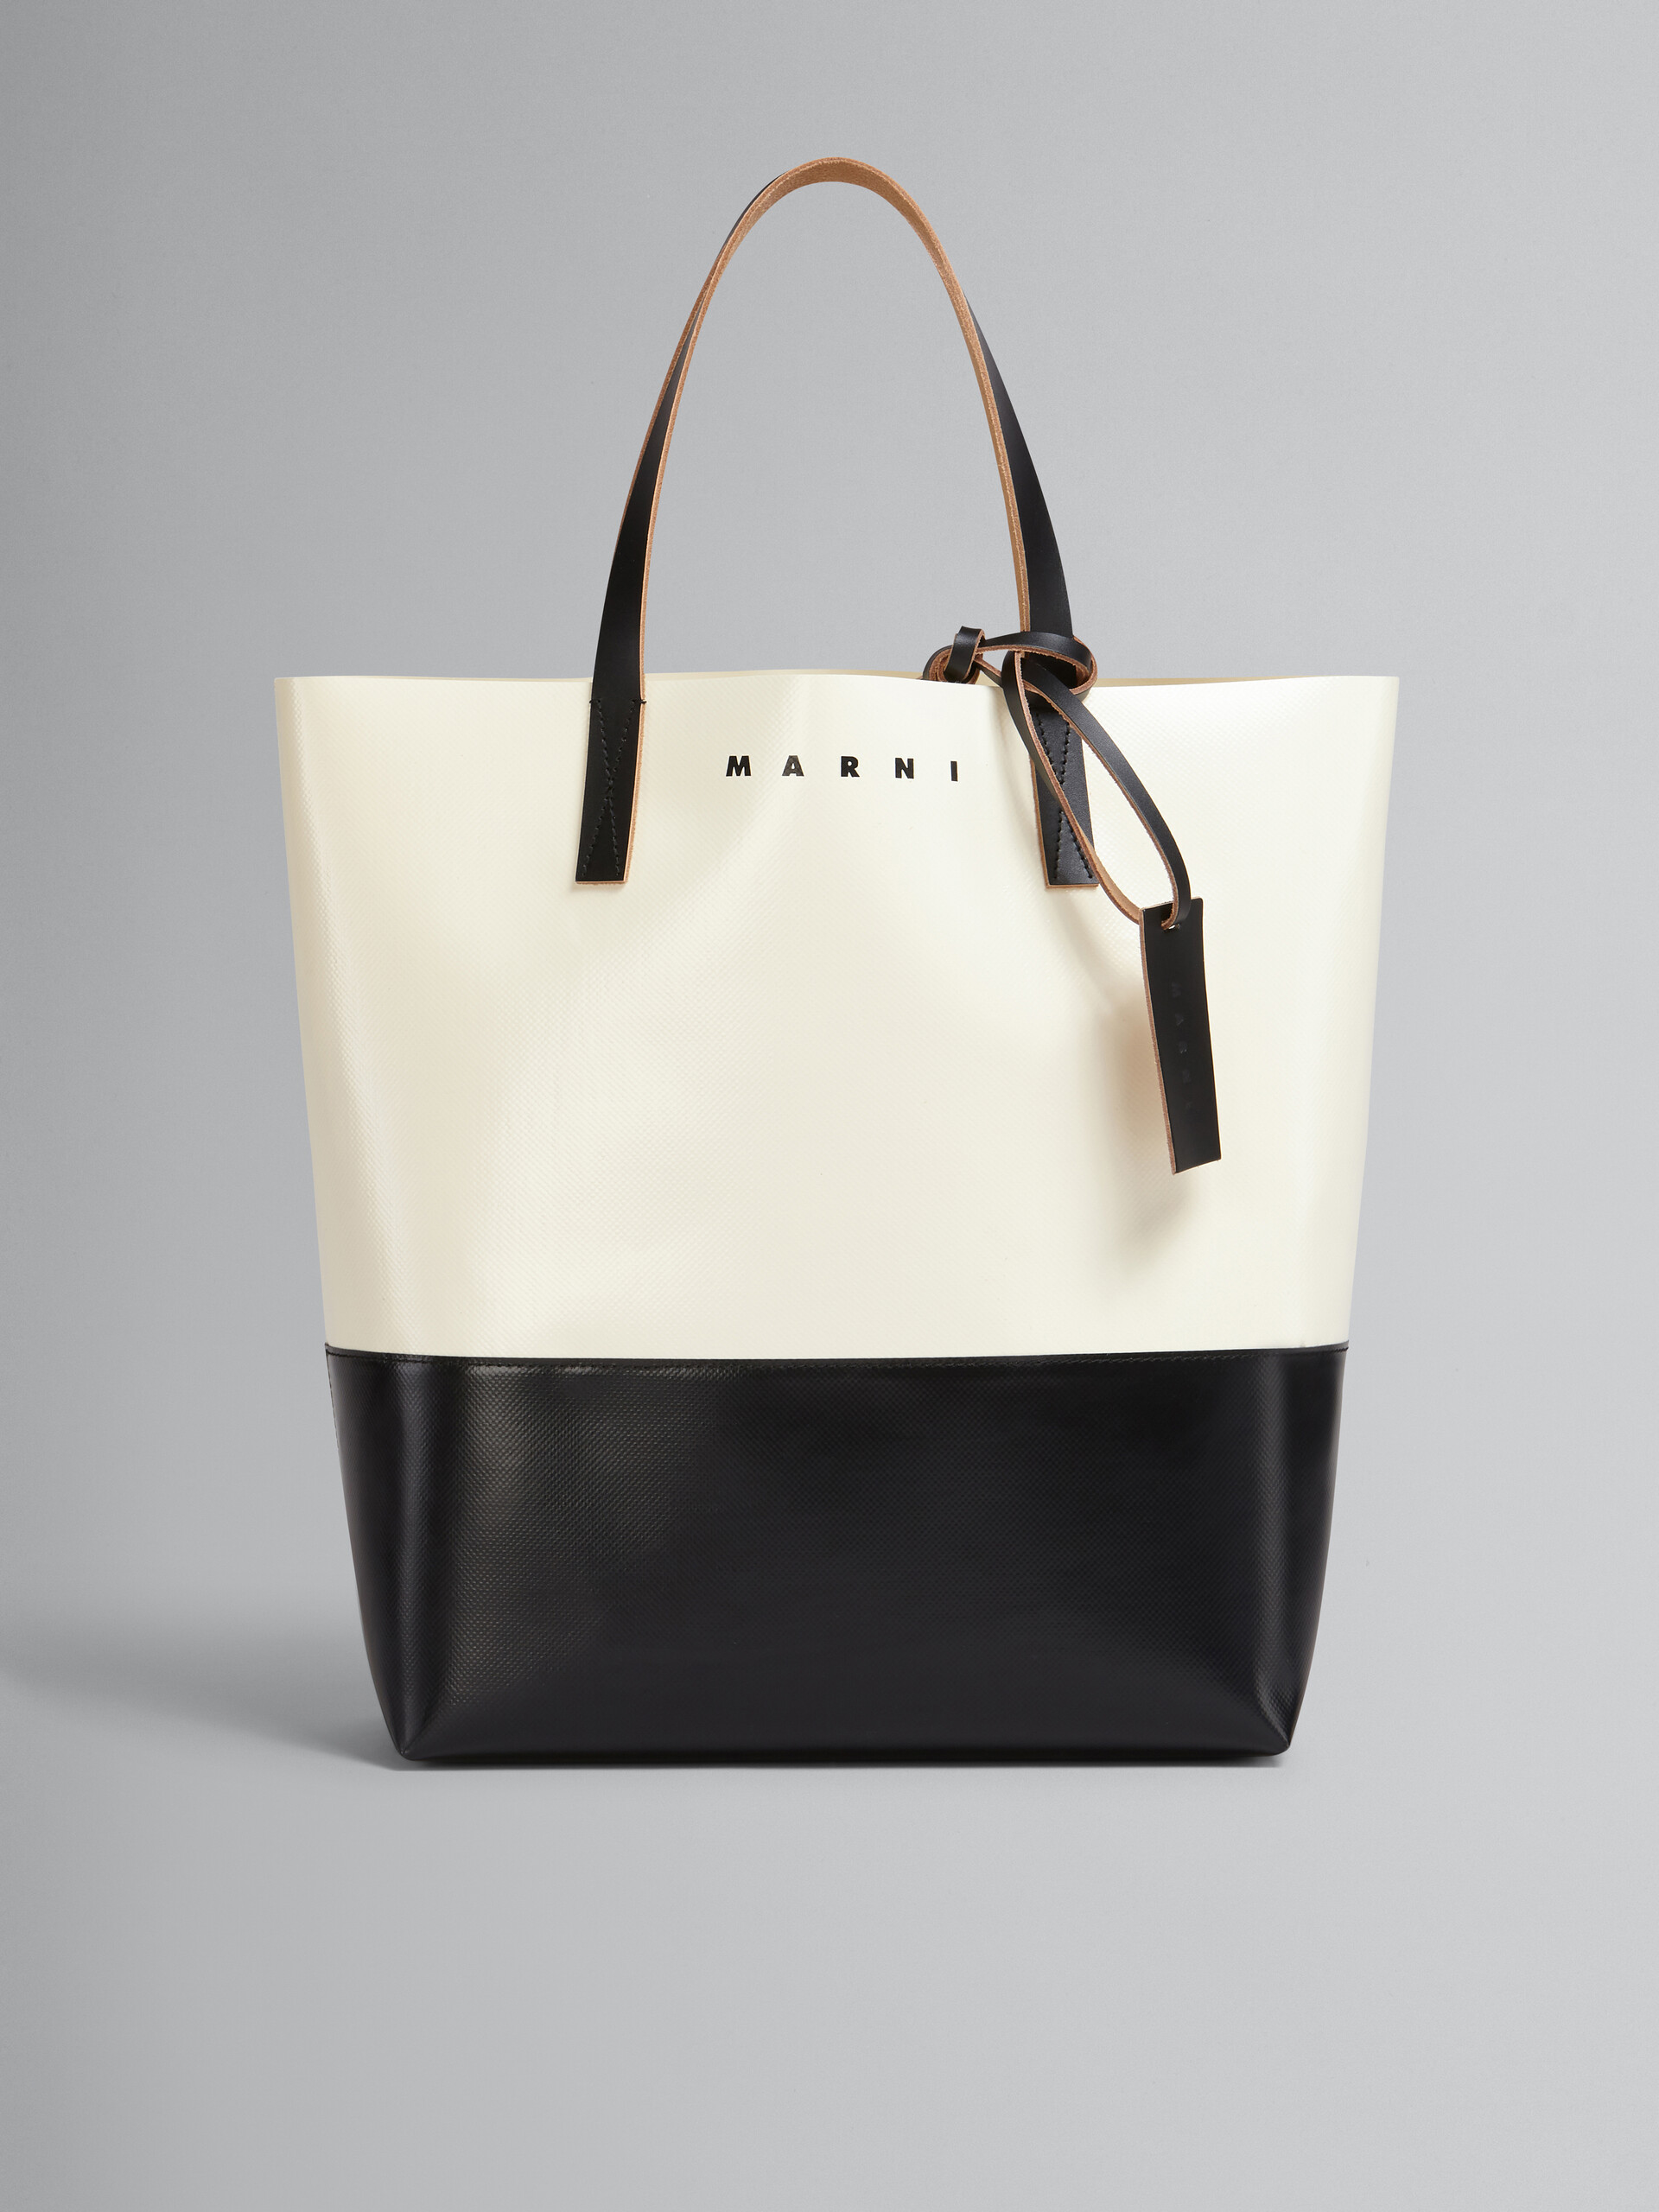 Tribeca shopping bag in white and black - Shopping Bags - Image 1